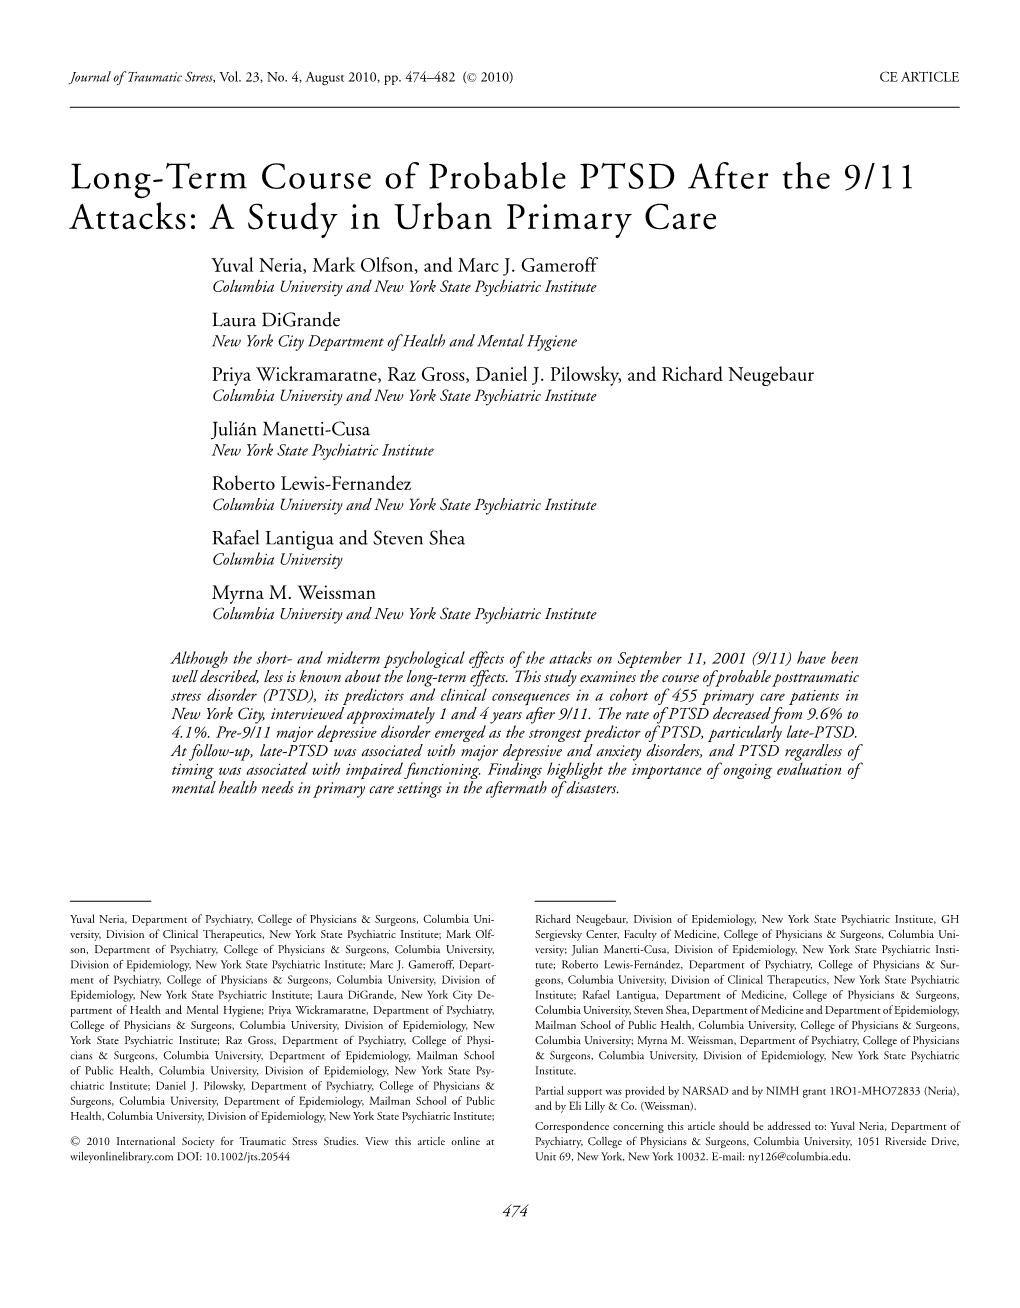 Longterm Course of Probable PTSD After the 9/11 Attacks: a Study In